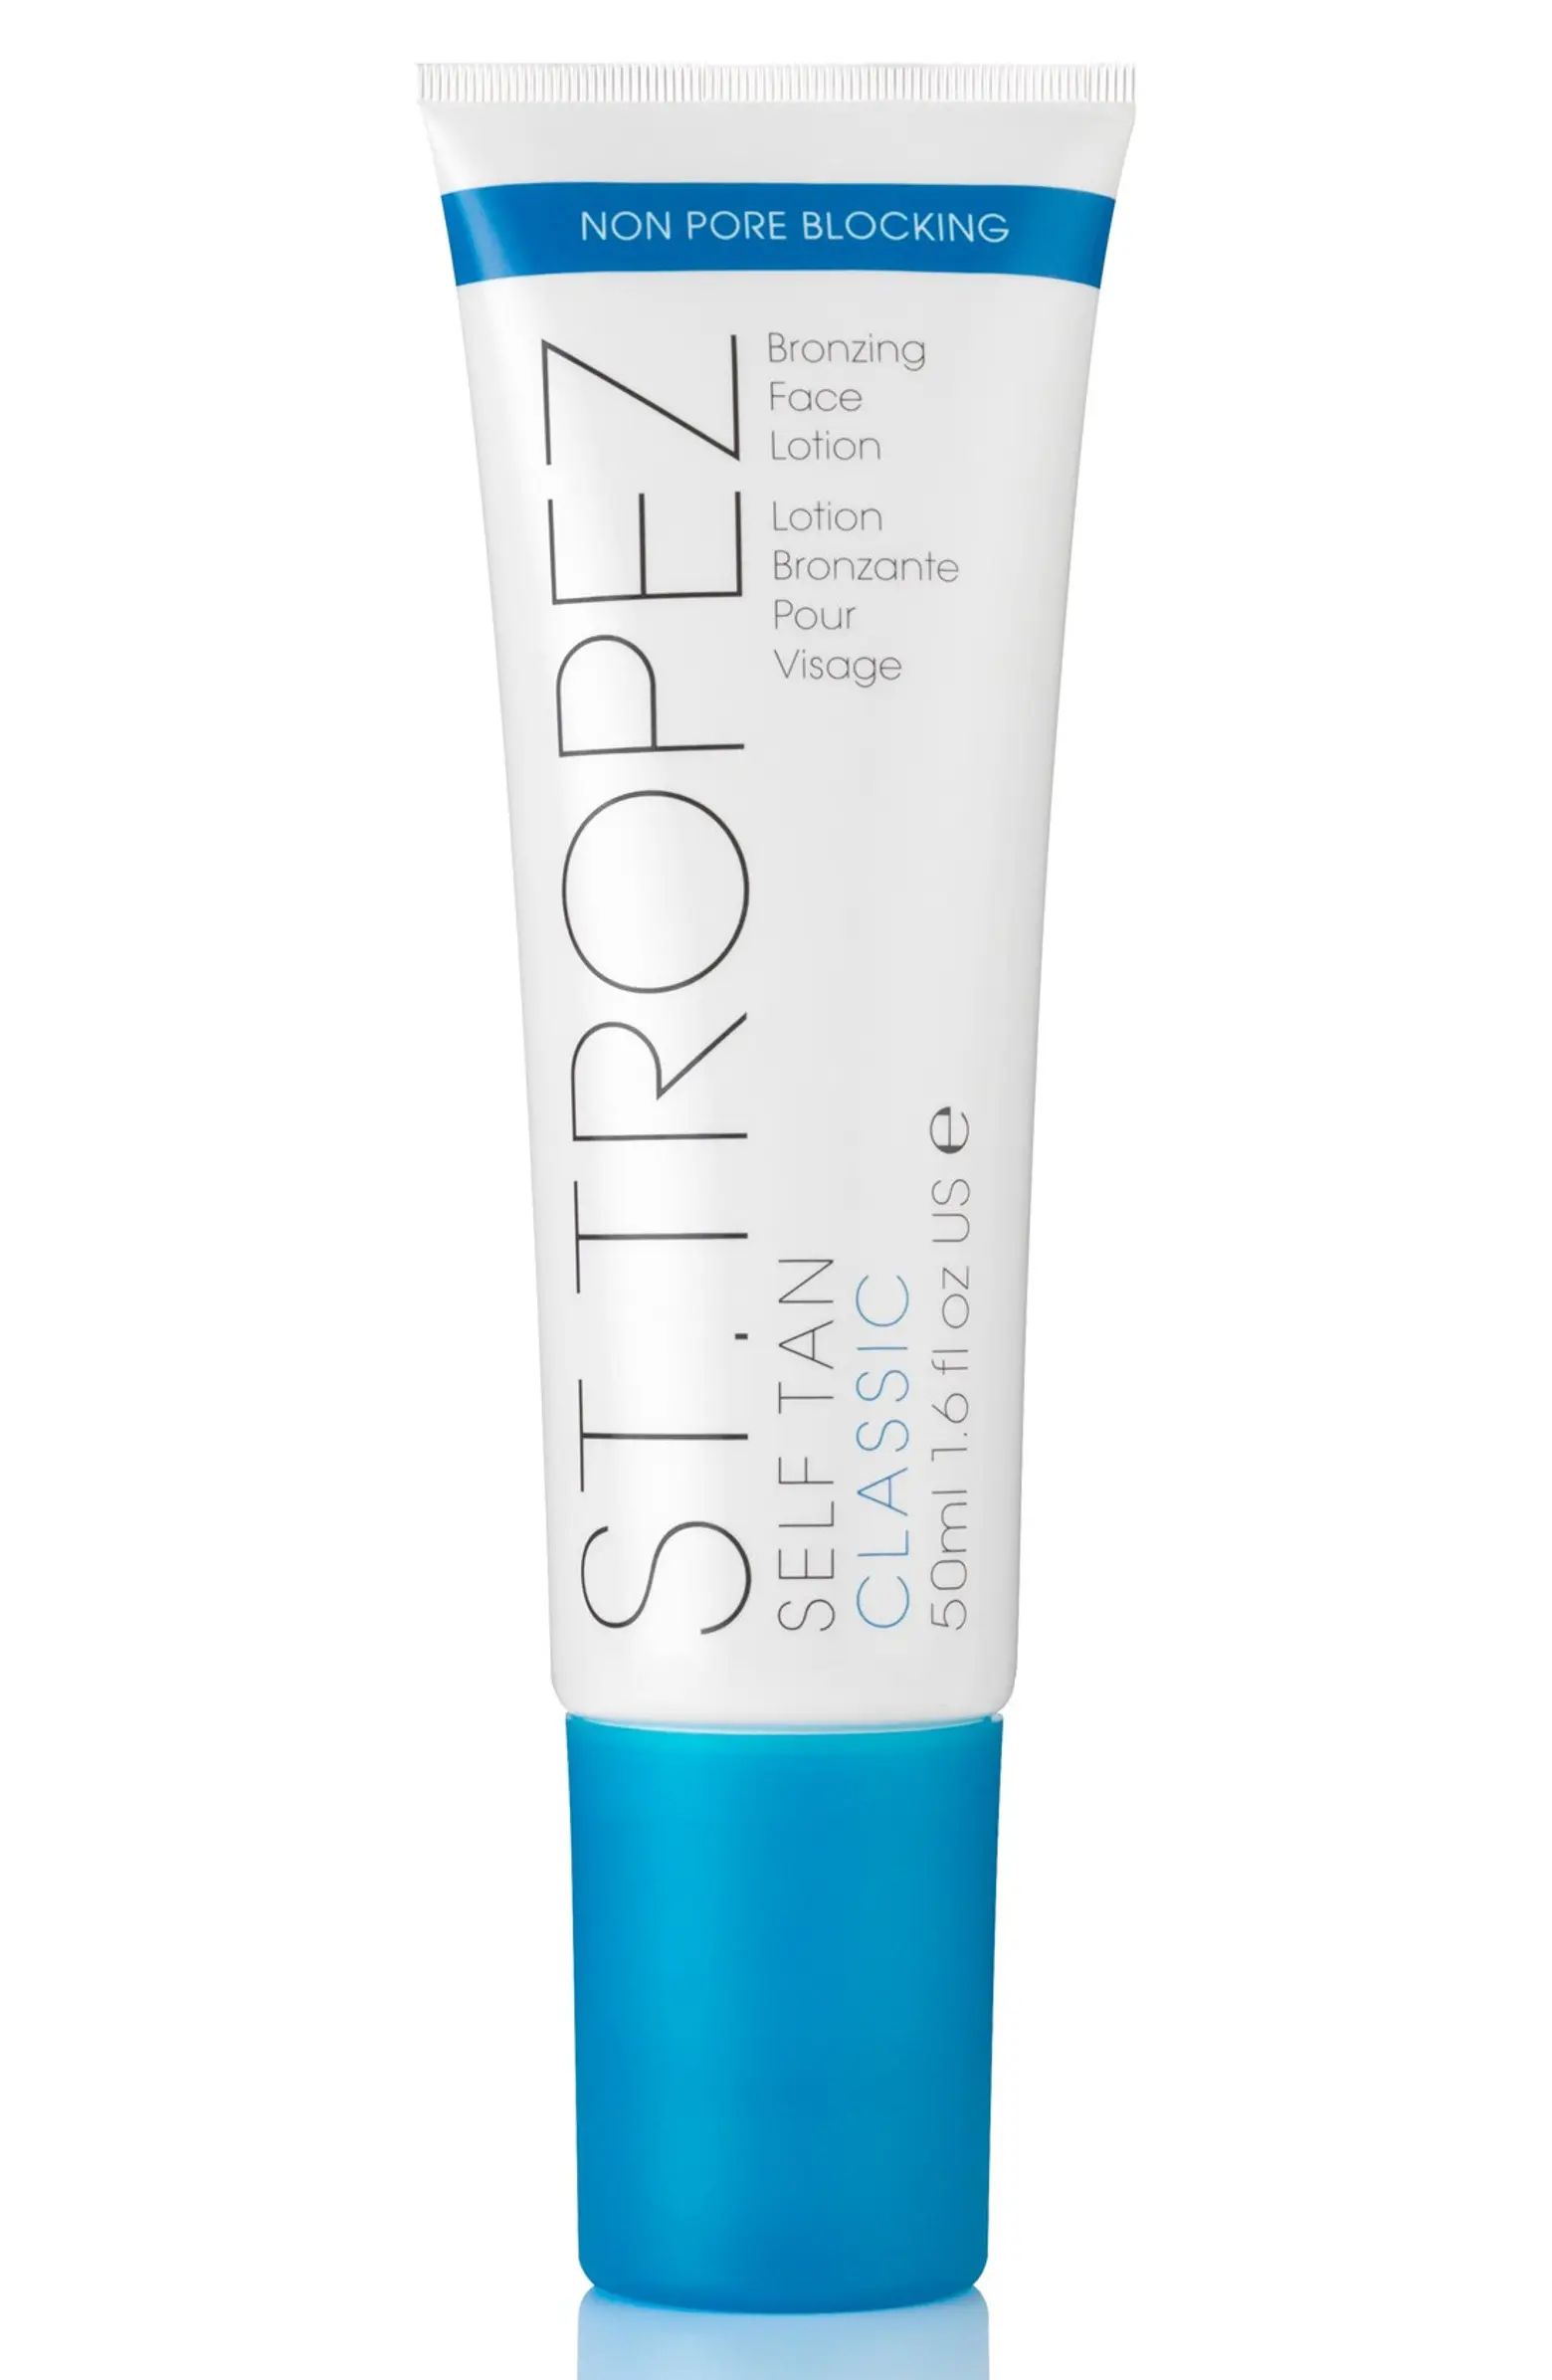 St. Tropez 'Self Tan' Classic Bronzing Face Lotion | Nordstrom | Nordstrom